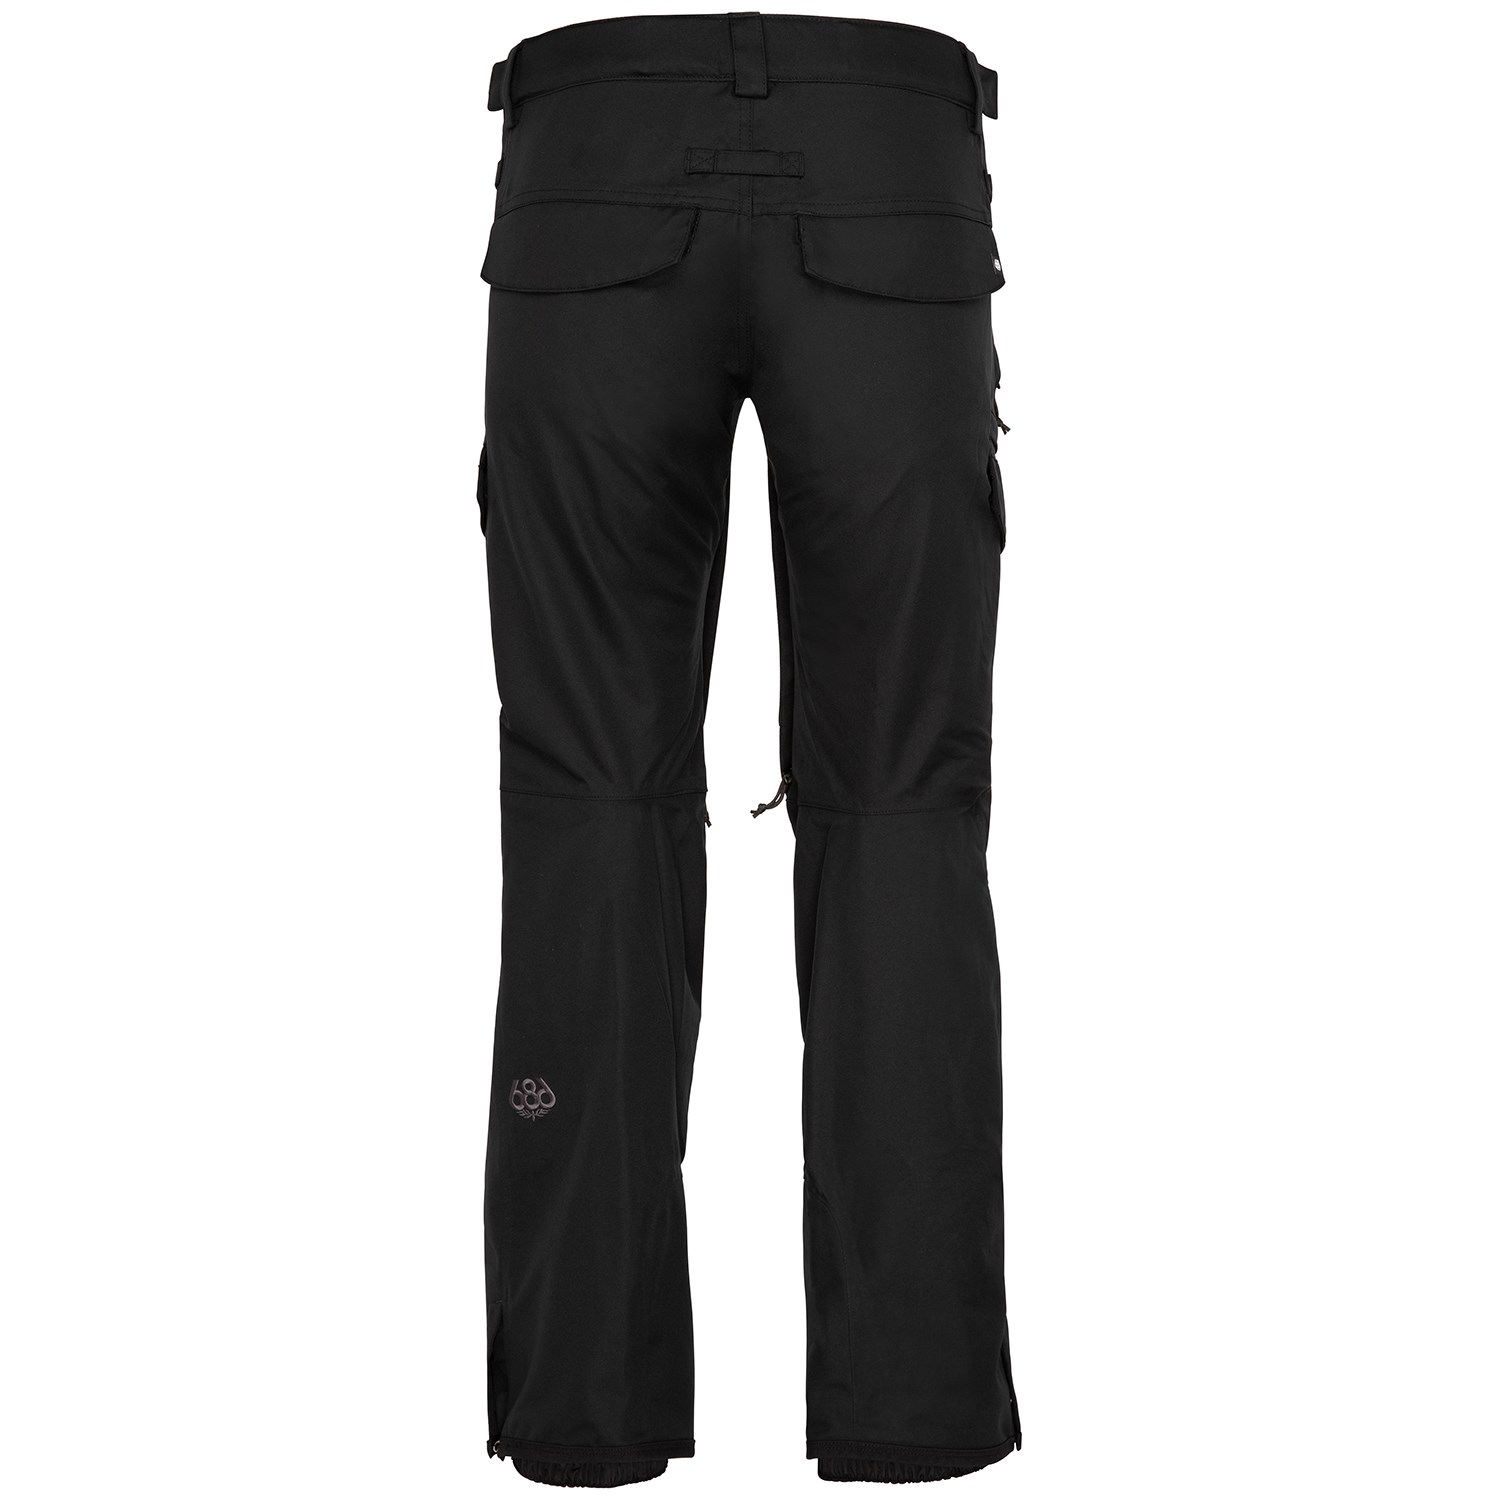 686 Smarty Cargo Pant 3 in 1 Cargo Ski Snowboard Pant Charcoal Large 